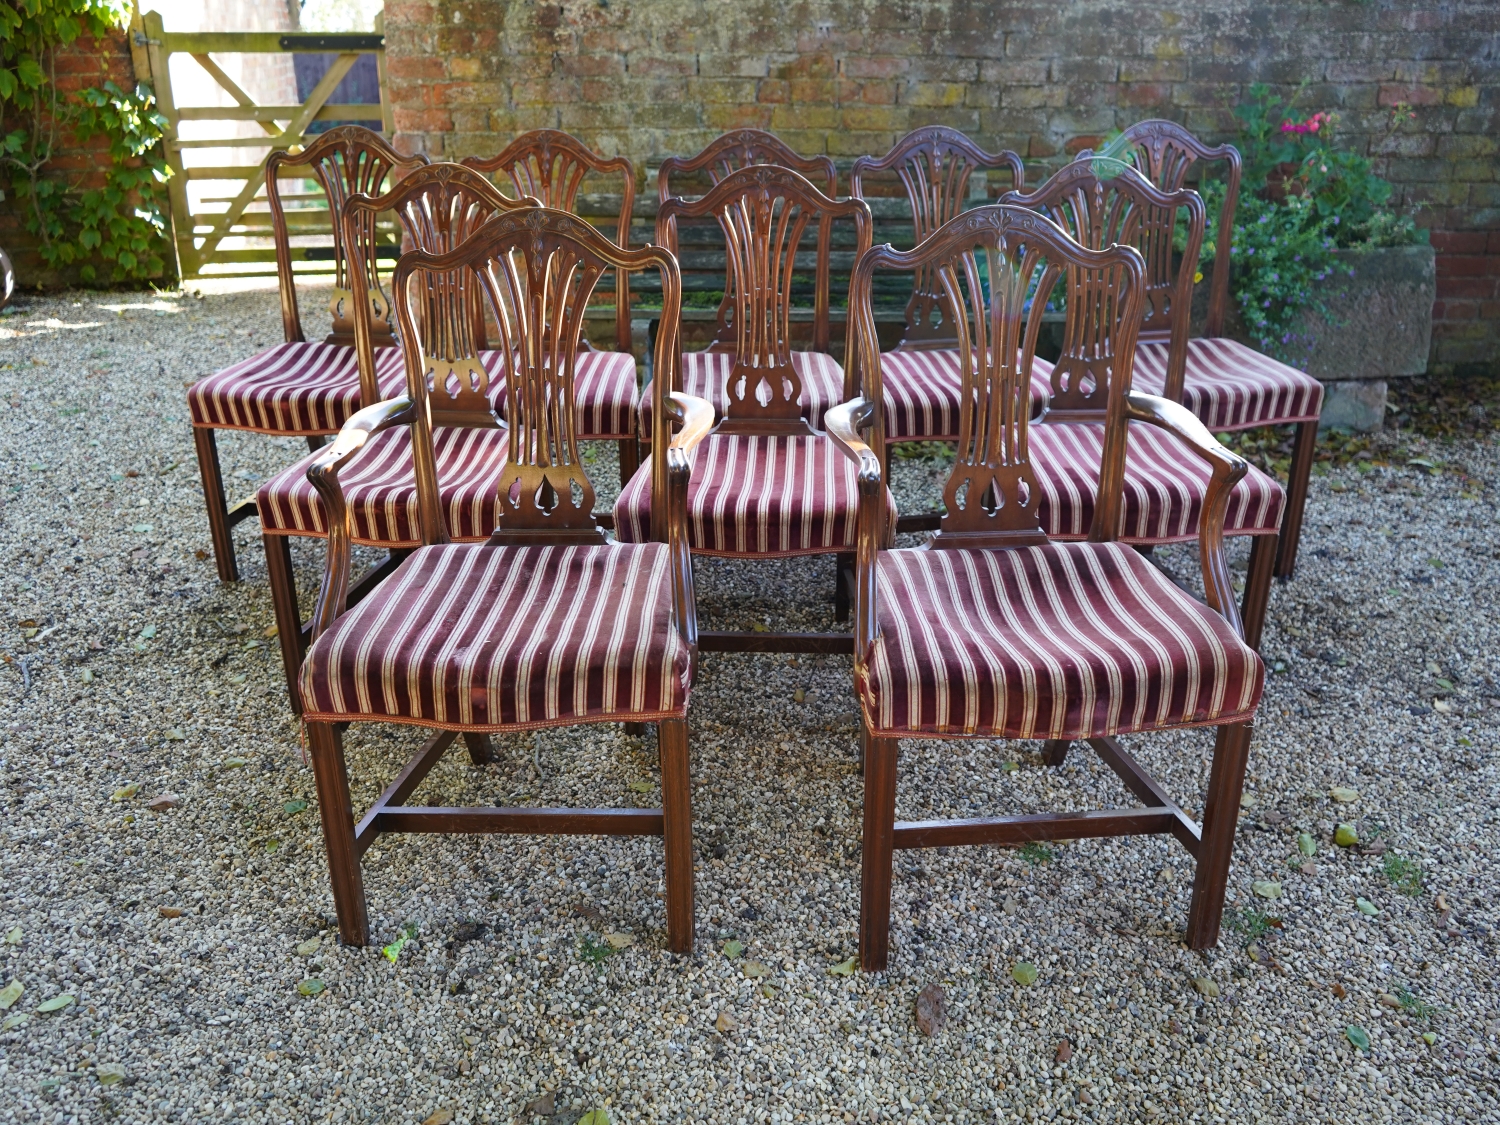 A Fine set of 10 Mahogany Dining Chairs comprising 8 single and 2 matching armchairs. Georgian in style to a design by George Hepplewhite.